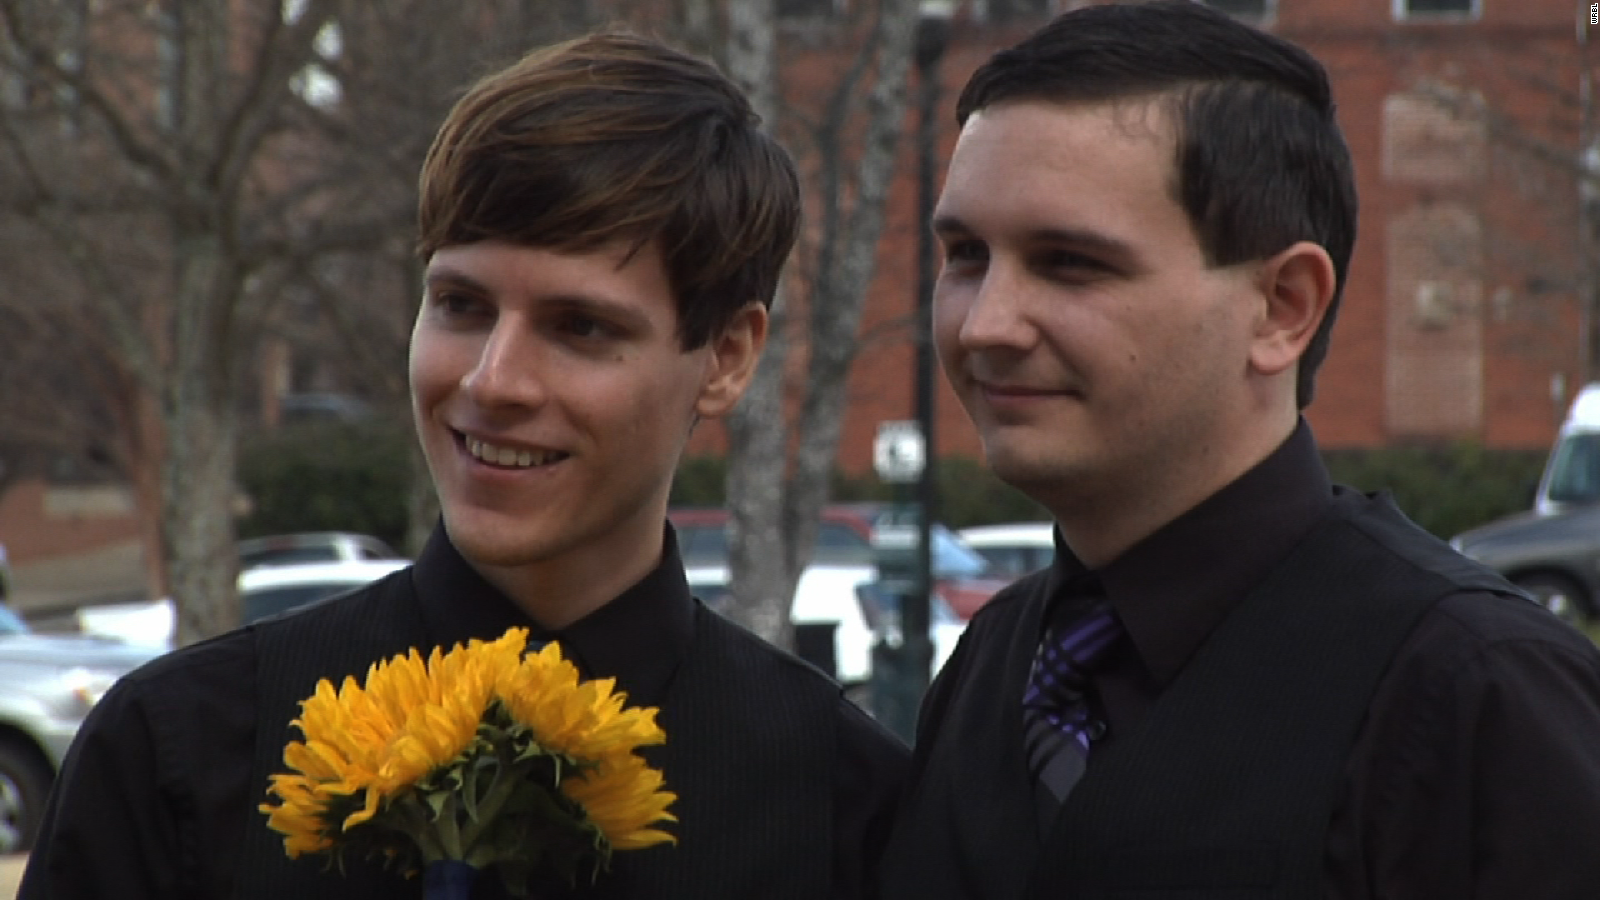 Same Sex Couple Marries In Front Of Courthouse Cnn Video 1459